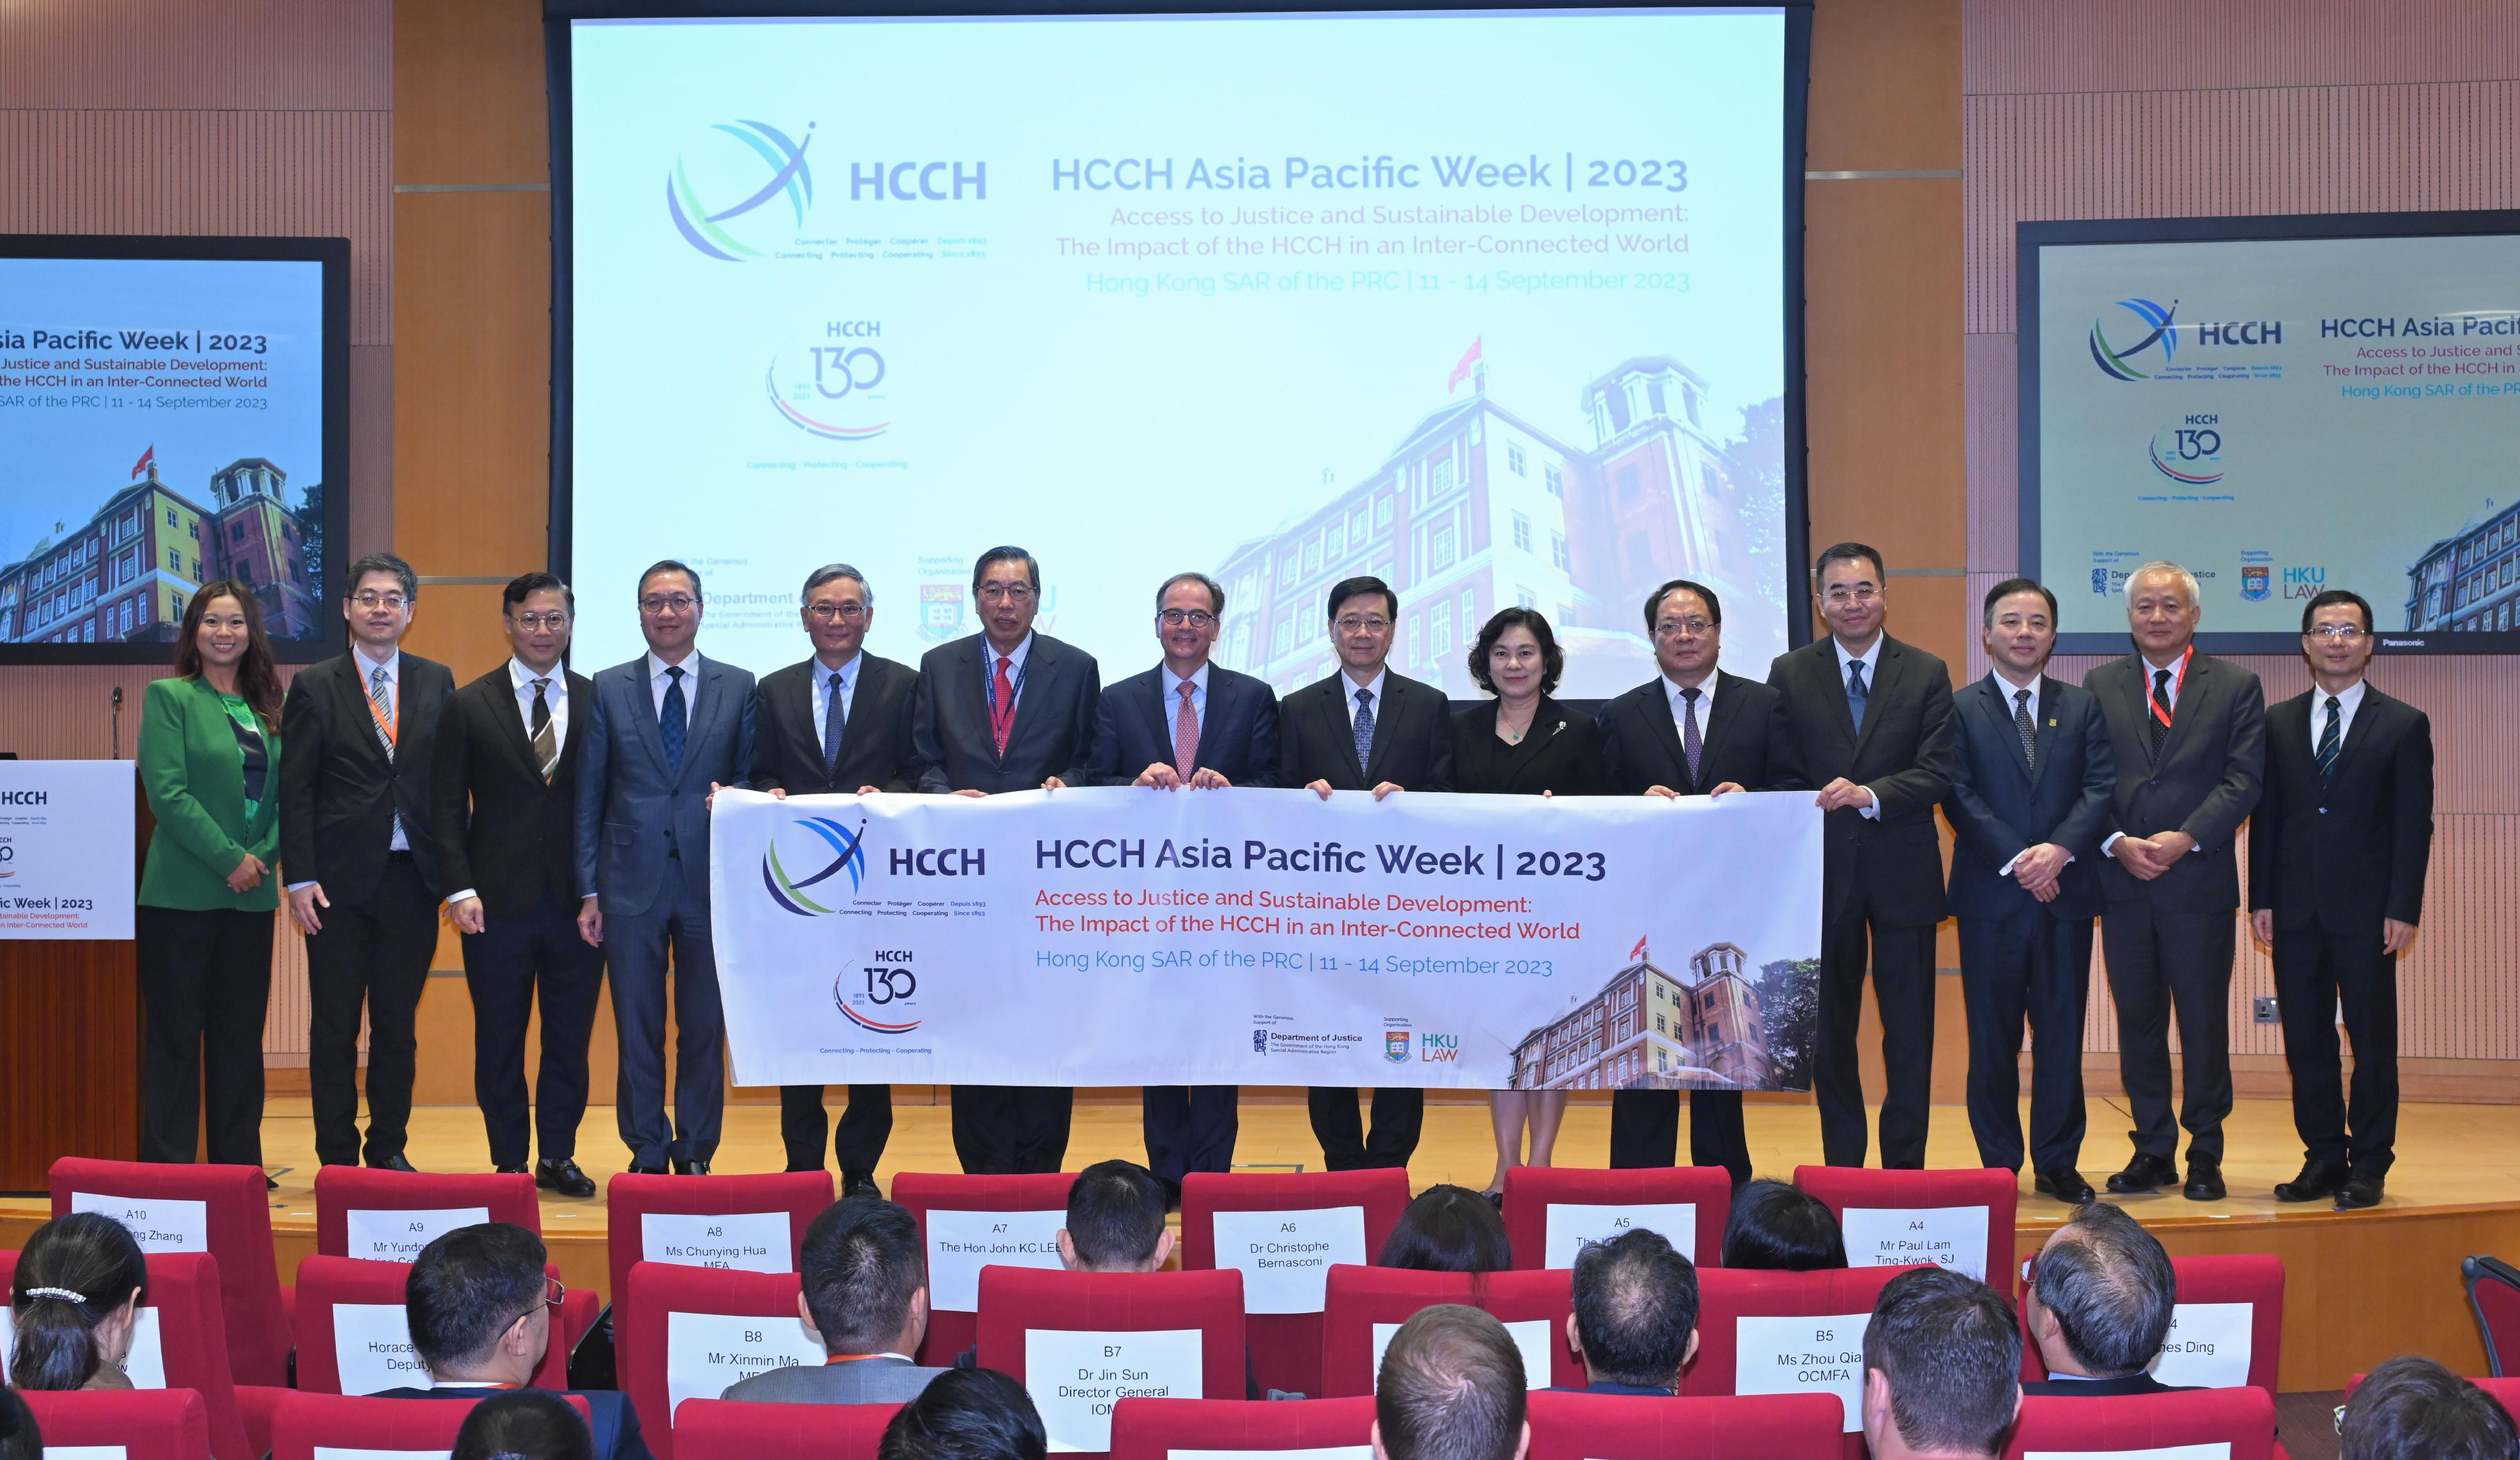 The Chief Executive, Mr John Lee, attended the HCCH Asia Pacific Week 2023 today (September 11). Photo shows (from third left) the Deputy Secretary for Justice, Mr Cheung Kwok-kwan; the Secretary for Justice, Mr Paul Lam, SC; the Chief Justice of the Court of Final Appeal, Mr Andrew Cheung Kui-nung; the President of the Legislative Council, Mr Andrew Leung; the Secretary General of the Hague Conference on Private International Law, Dr Christophe Bernasconi; Mr Lee; member of the CPC Committee of the Ministry of Foreign Affairs and Assistant Minister of Foreign Affairs, Ms Hua Chunying; the Acting Commissioner of the Office of the Commissioner of the Ministry of Foreign Affairs of the People's Republic of China in the Hong Kong Special Administrative Region, Mr Pan Yundong, and other guests at the event.